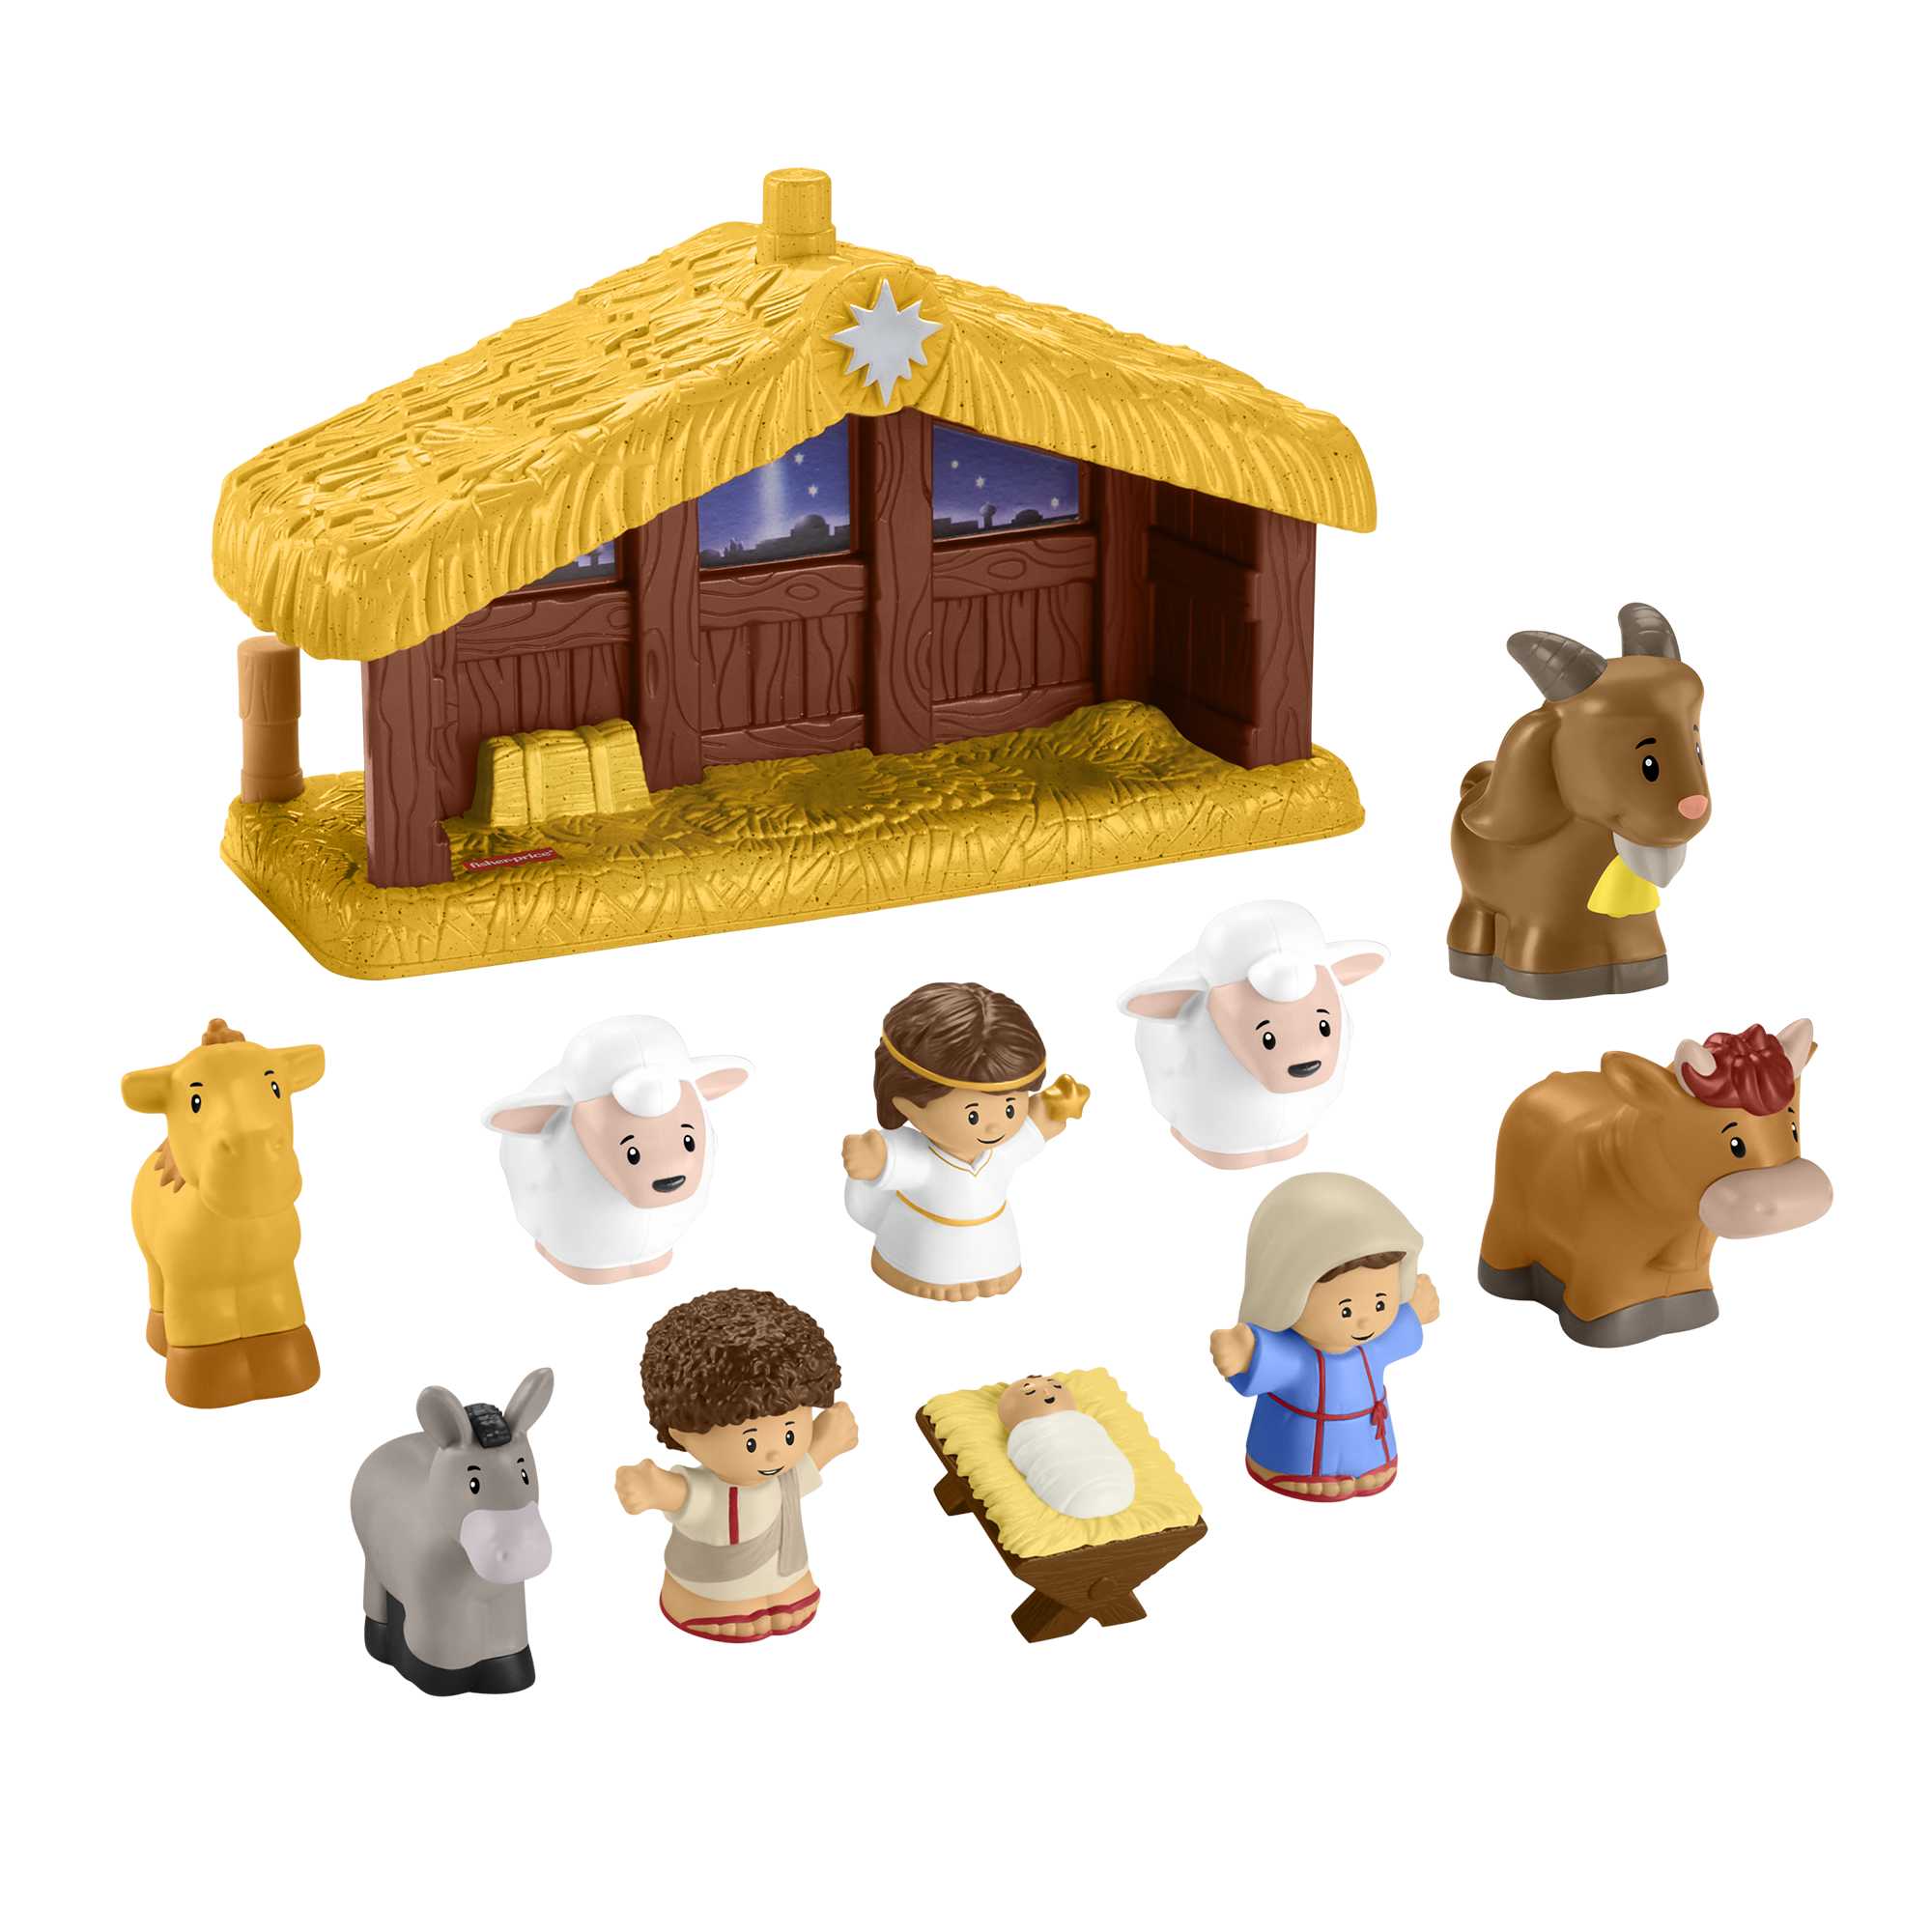 Fisher-Price (フィッシャープライス) Little People Nativity その他